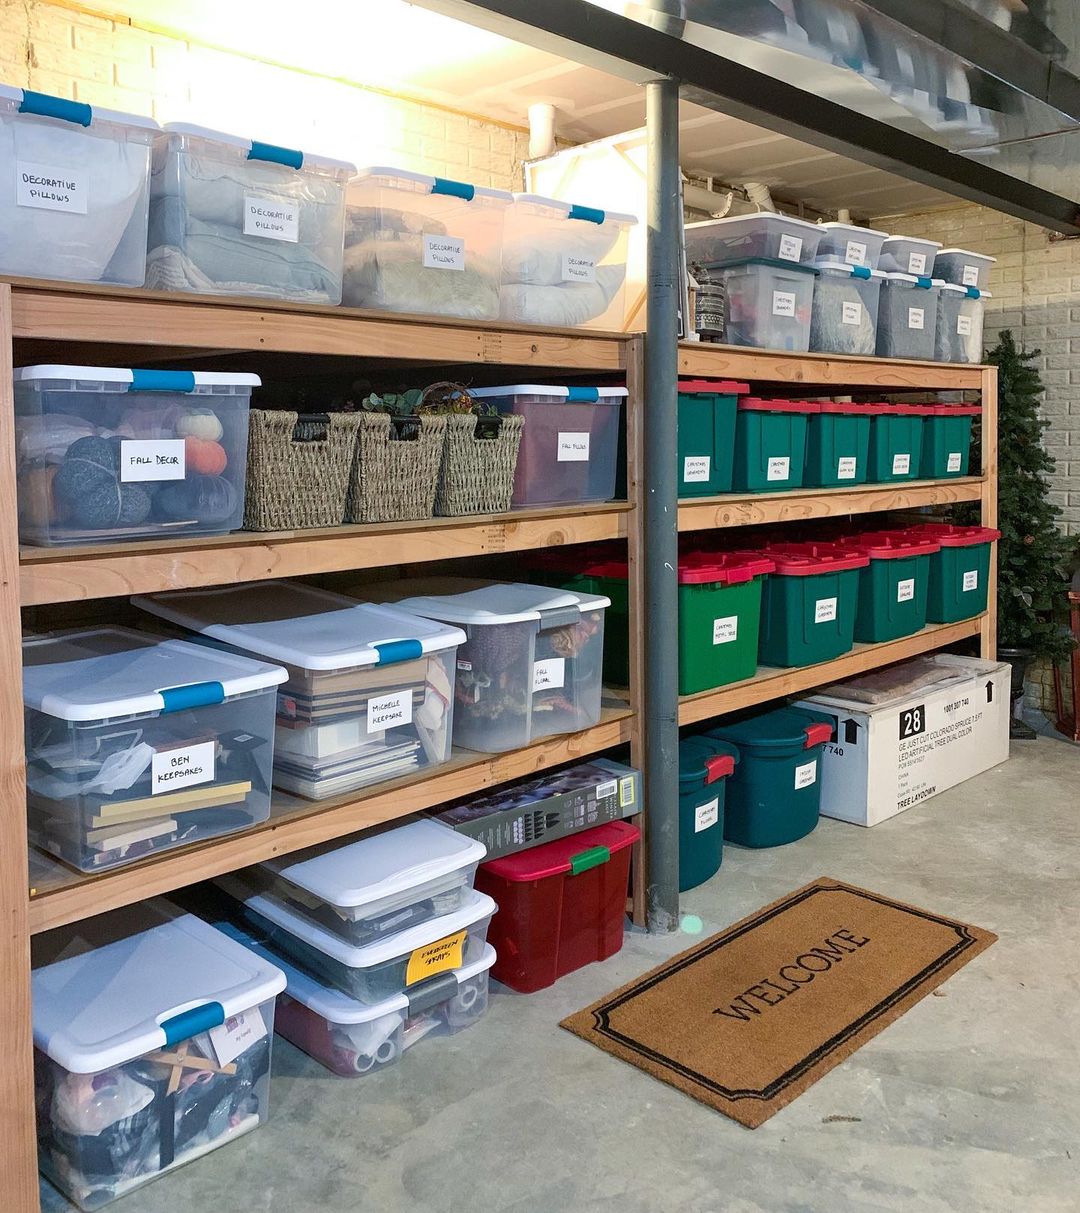 Basement Storage Space with Clear Totes on Shelves. Photo by Instagram user @time4organizing